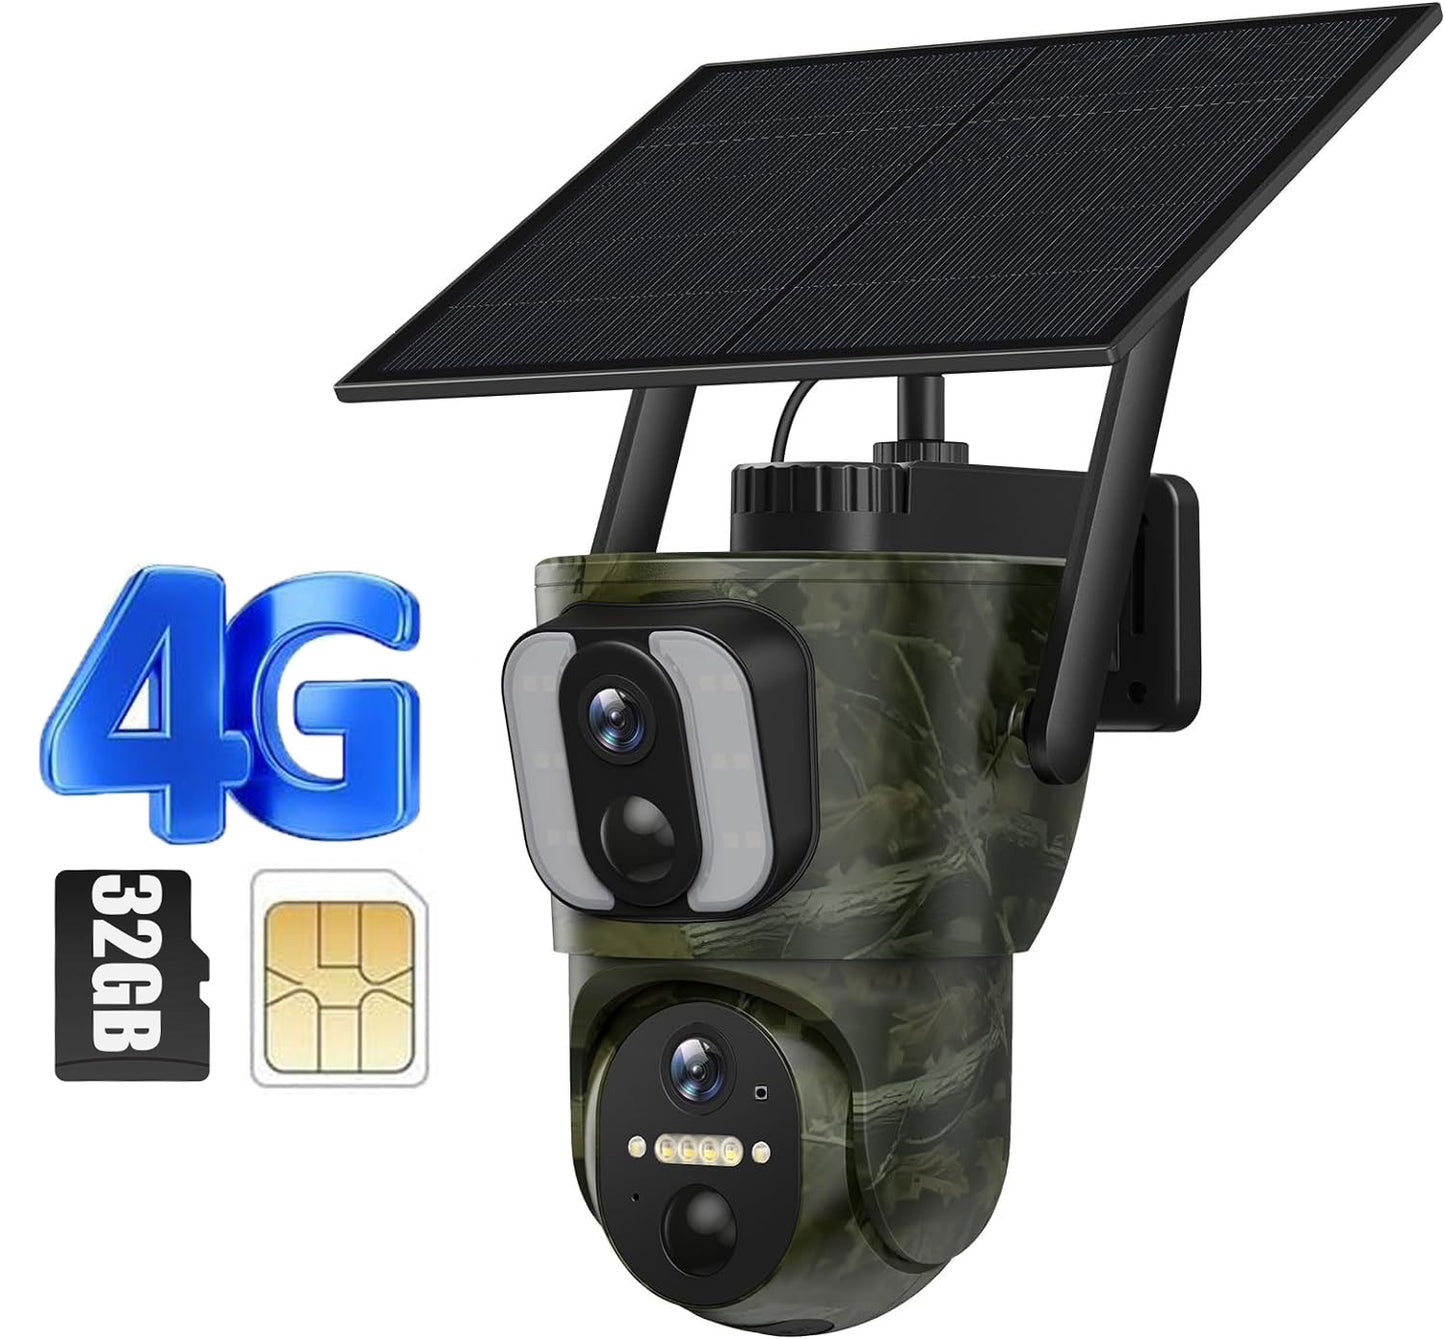 CAMPARK Cellular Trail Camera with SD Card Dual Len 4G LTE Wireless 1080P Pan Tilt Solar Hunting Game Camera Color Night Vision 360° Full View Waterproof IP66 Motion Alert for Wildlife Monitoring